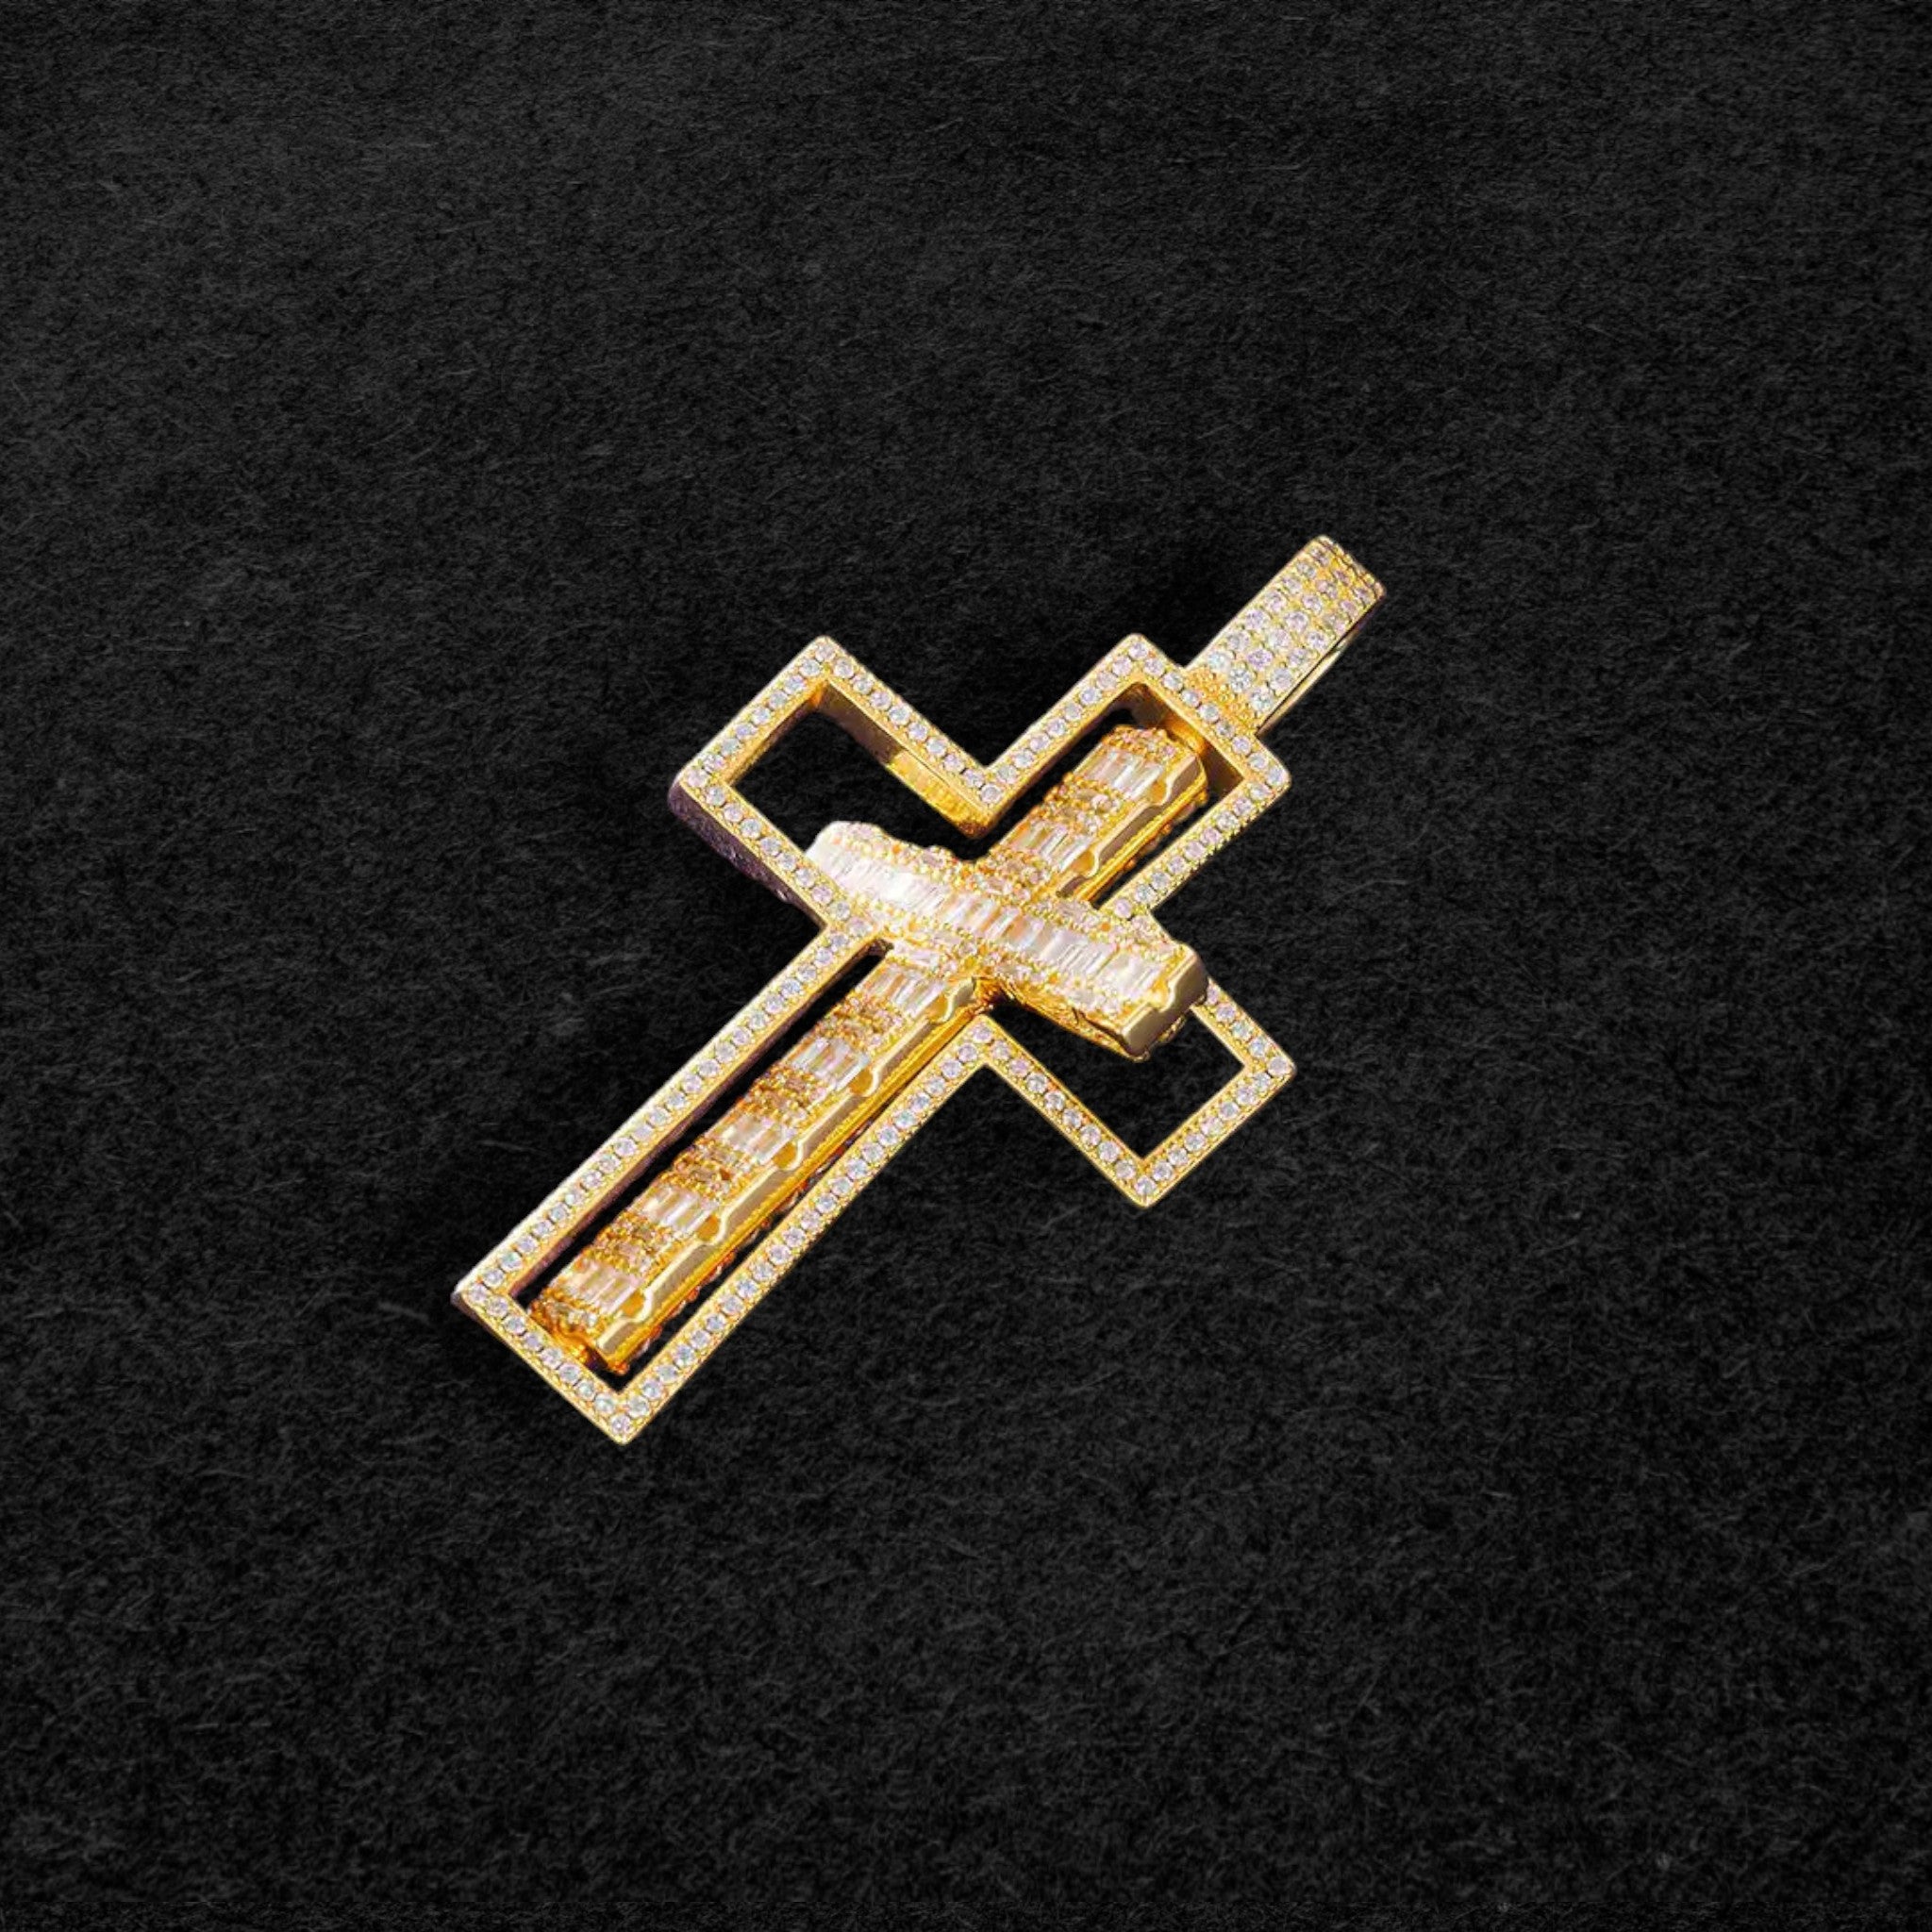 Rotatable Round and Baguette Cross Pendant